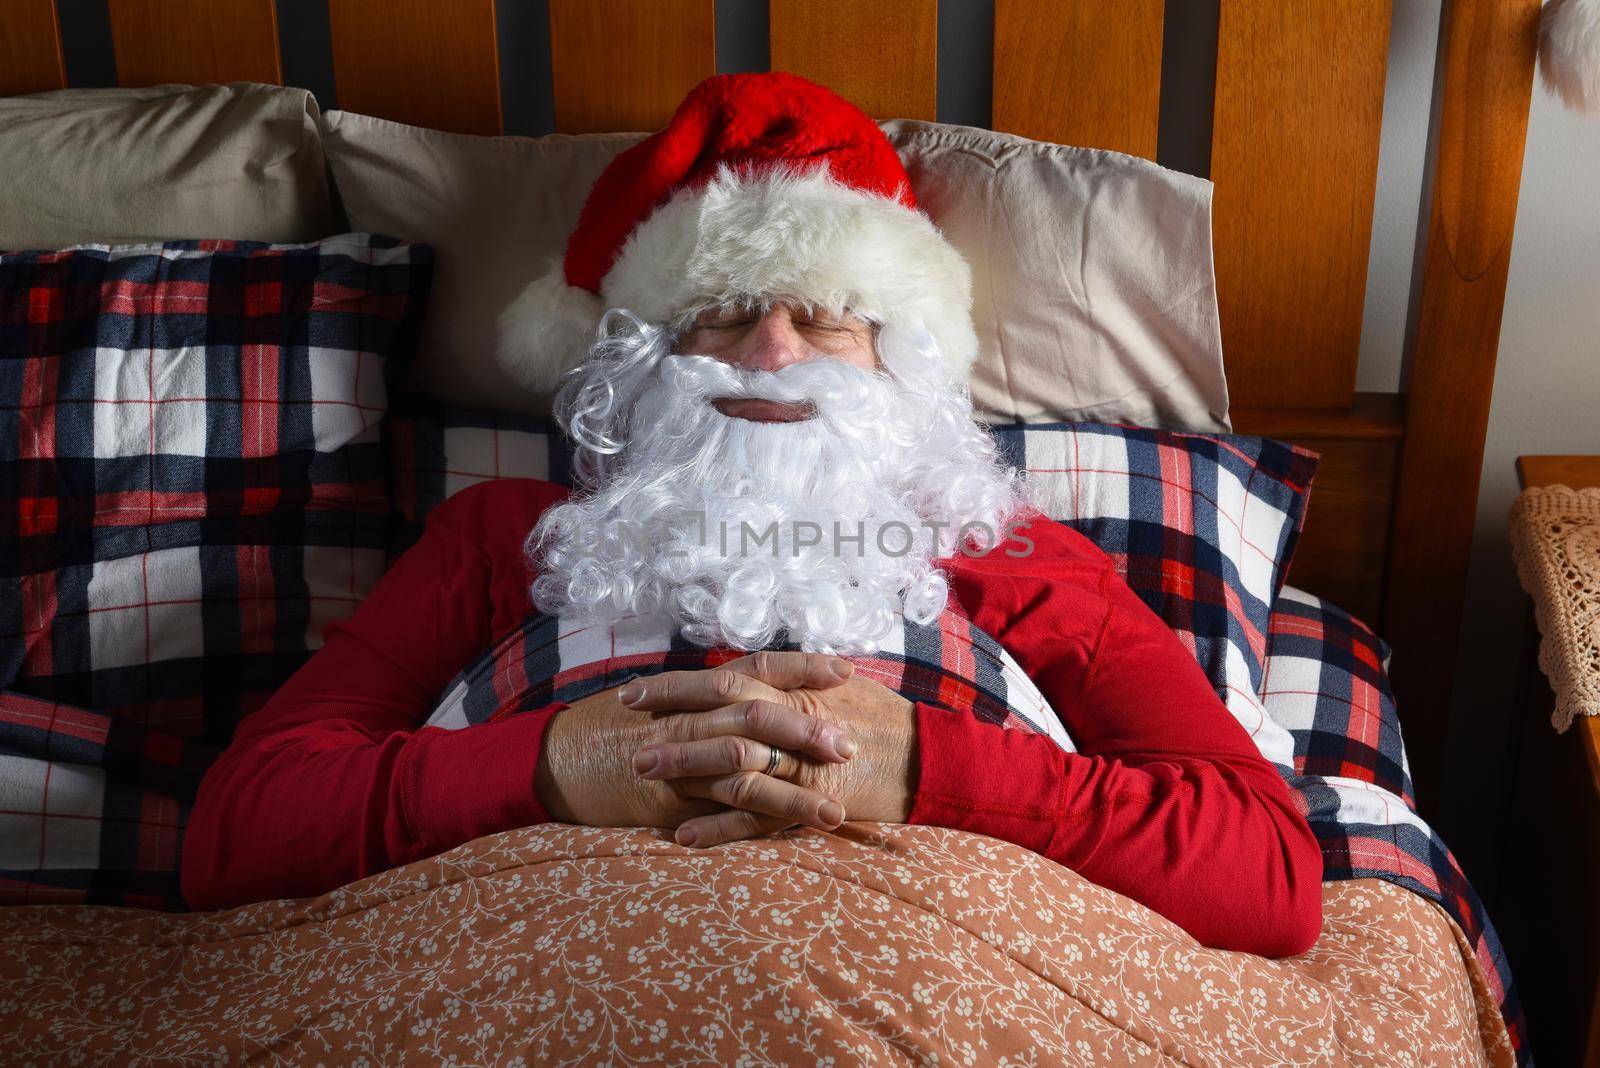 Santa Claus sleeping in his bed at the North Pole, with his hands folded on his chest, After His Christmas Eve deliveries.